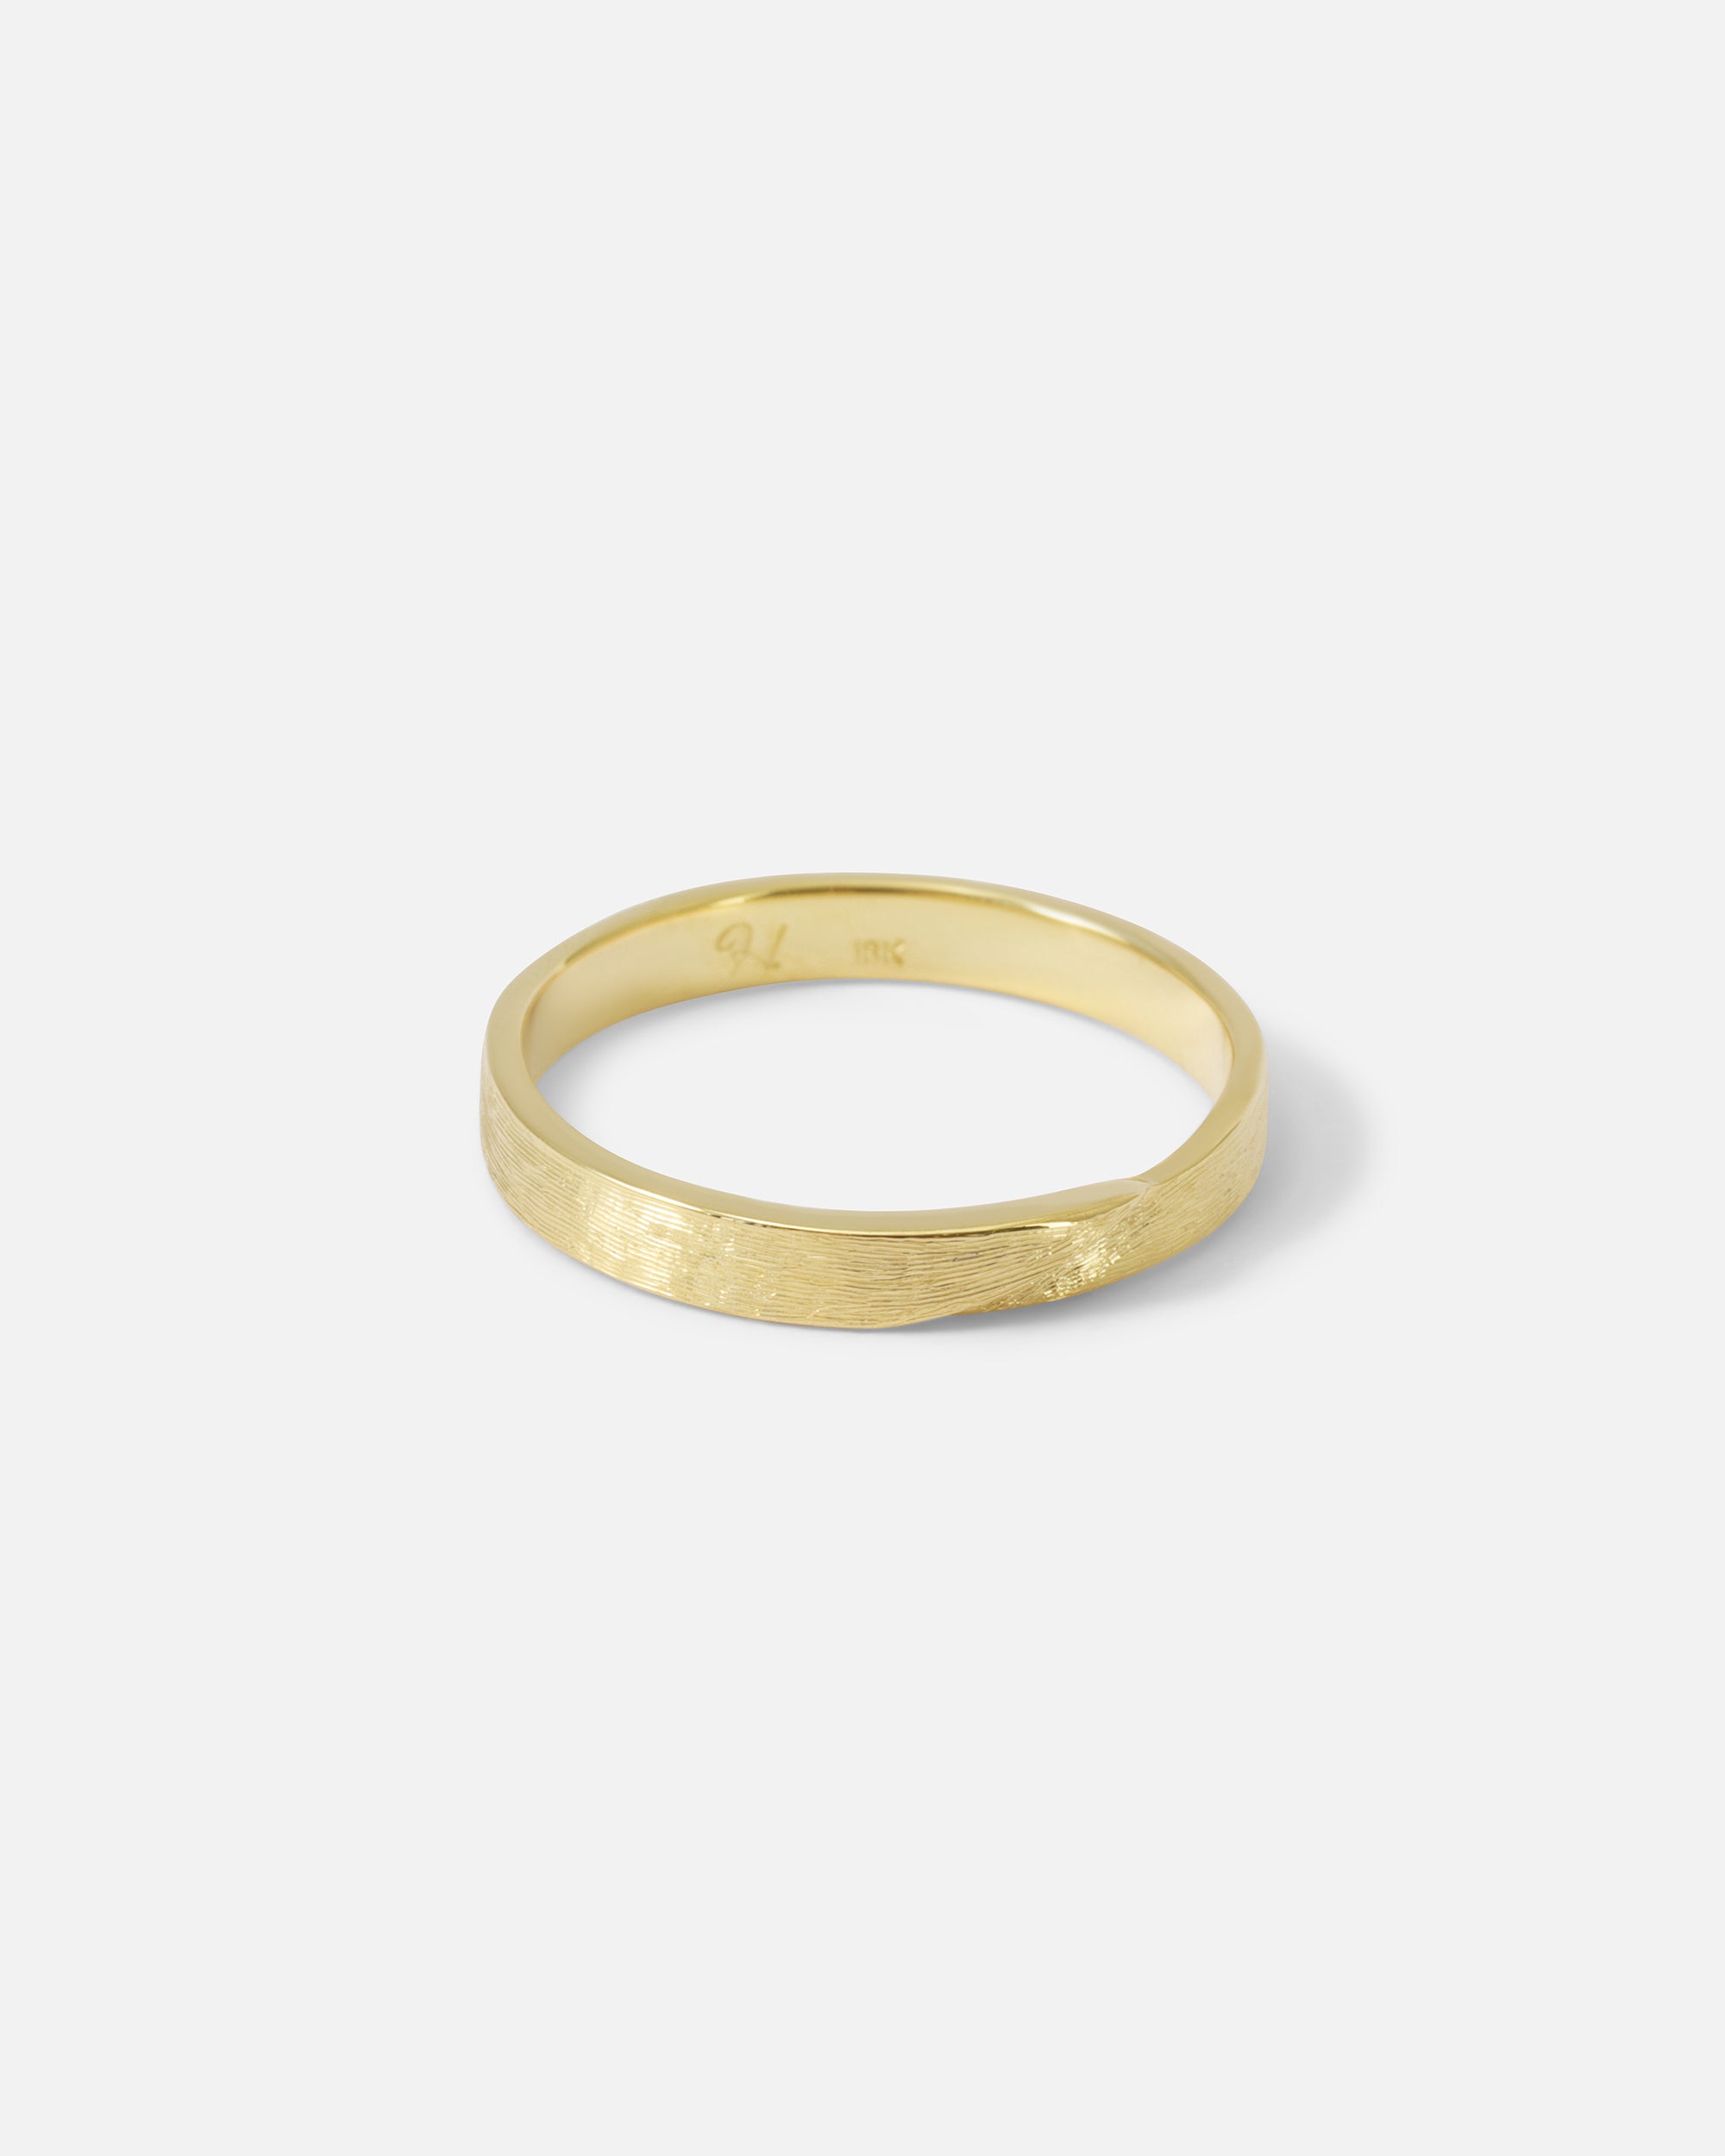 Enishi Ring / Small By Hiroyo